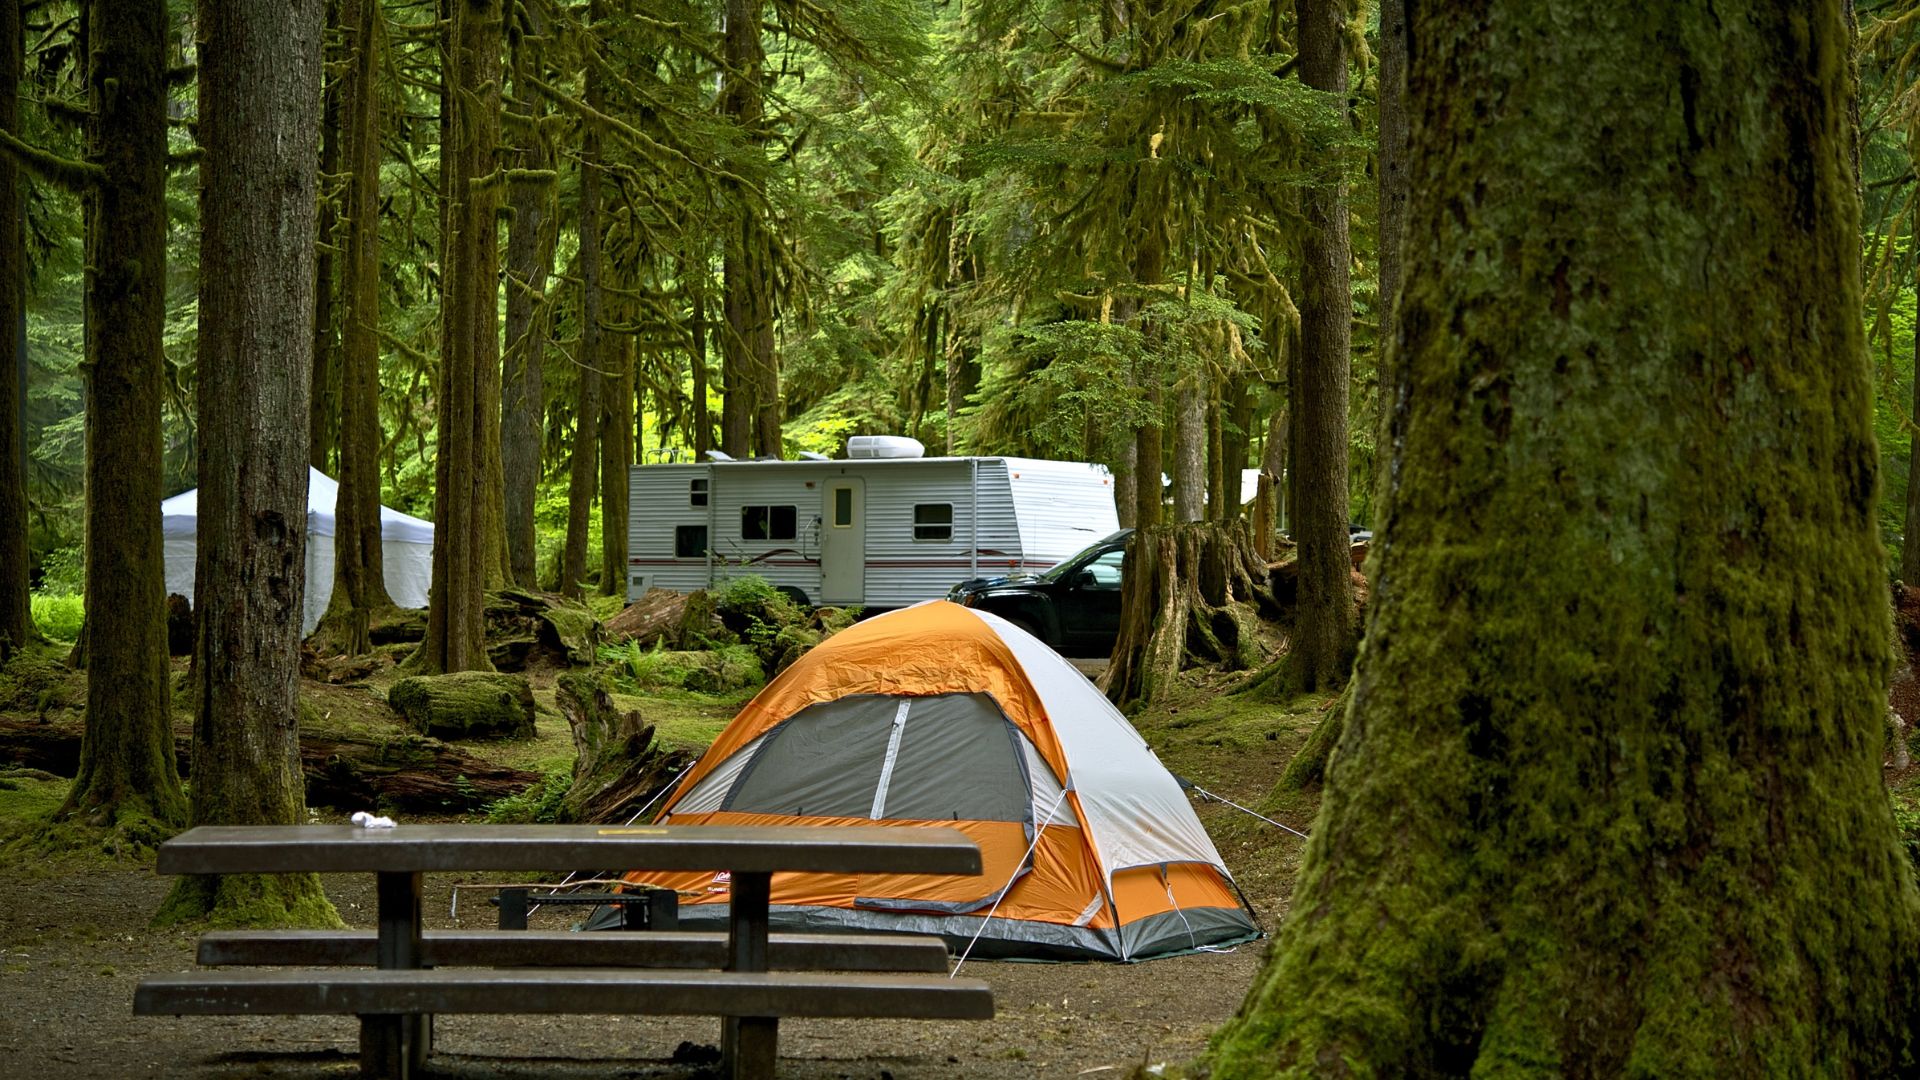 A tent and picnic table sit in a forested campground with an RV in the background